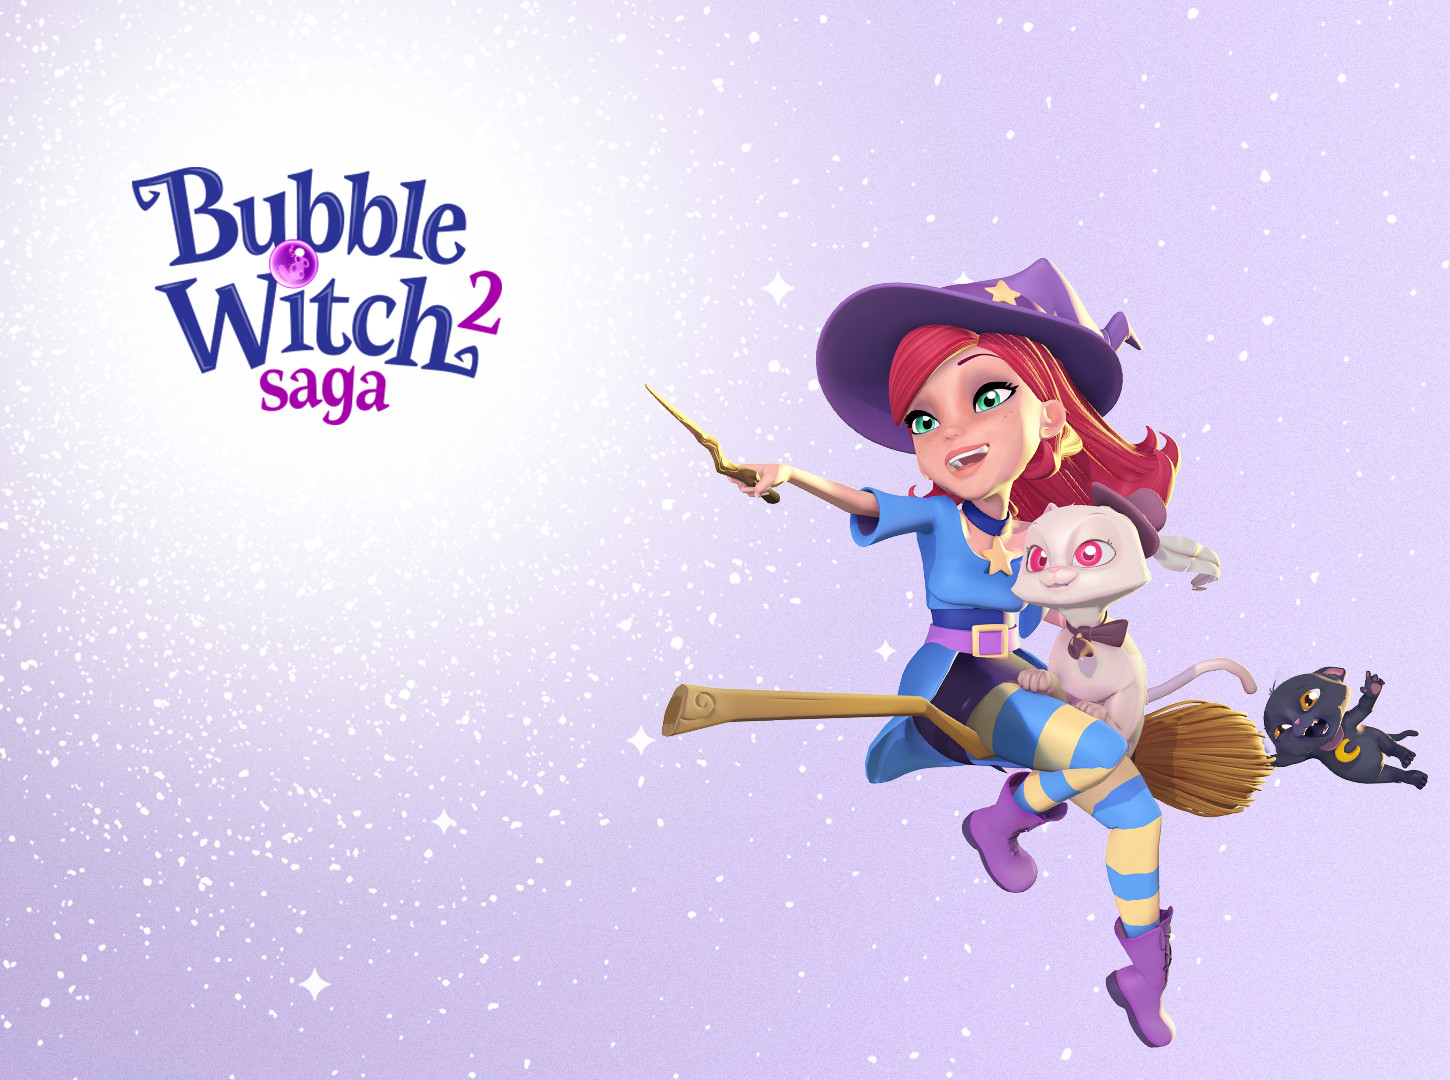 UI for King's mobile game: Bubble Witch 2 Saga